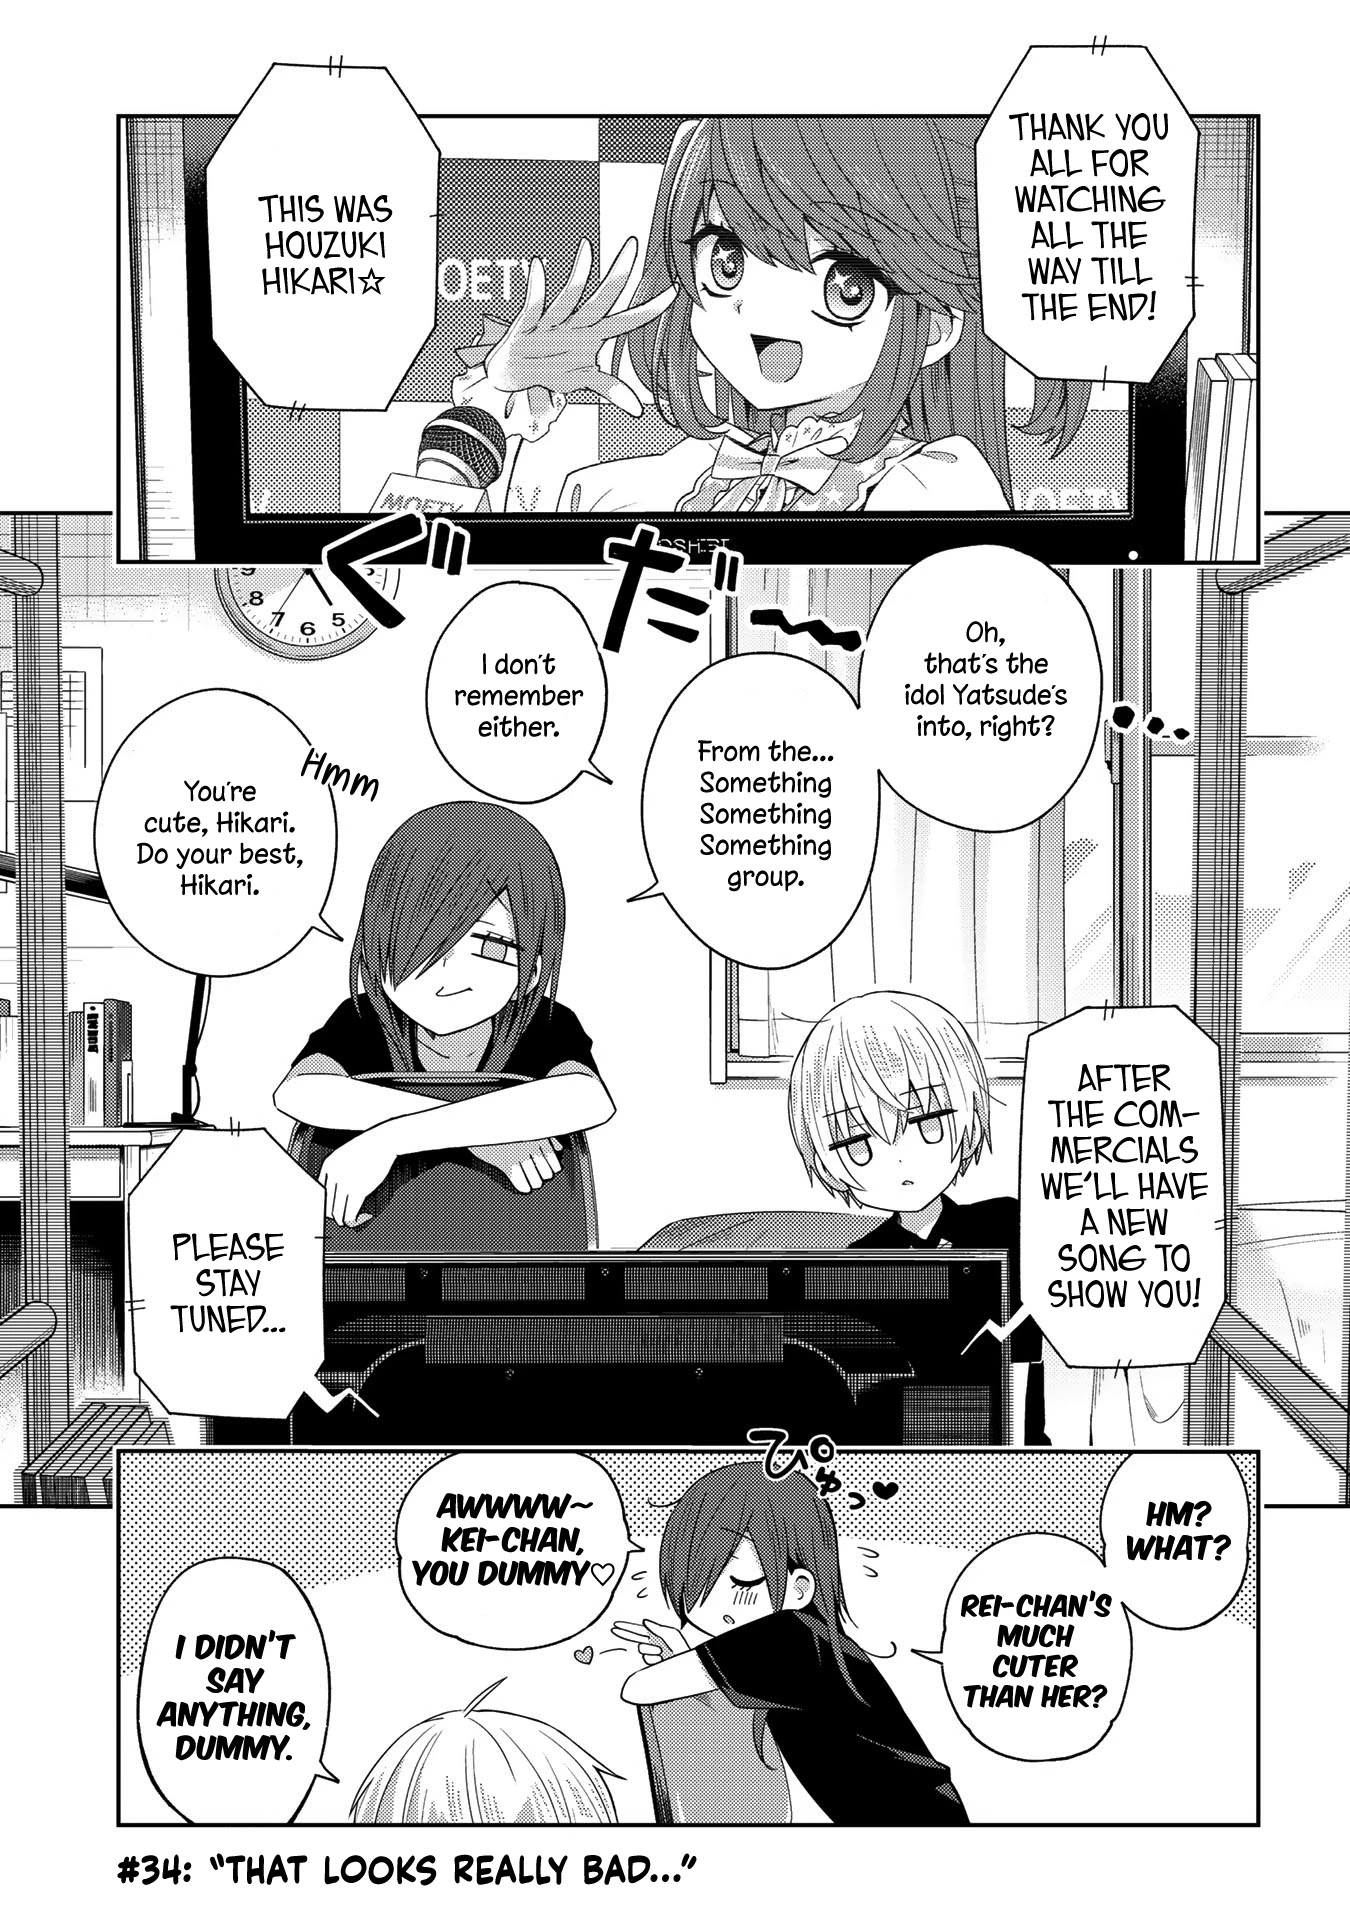 School Zone (Ningiyau) Chapter 34: That Looks Really Bad... - Picture 1